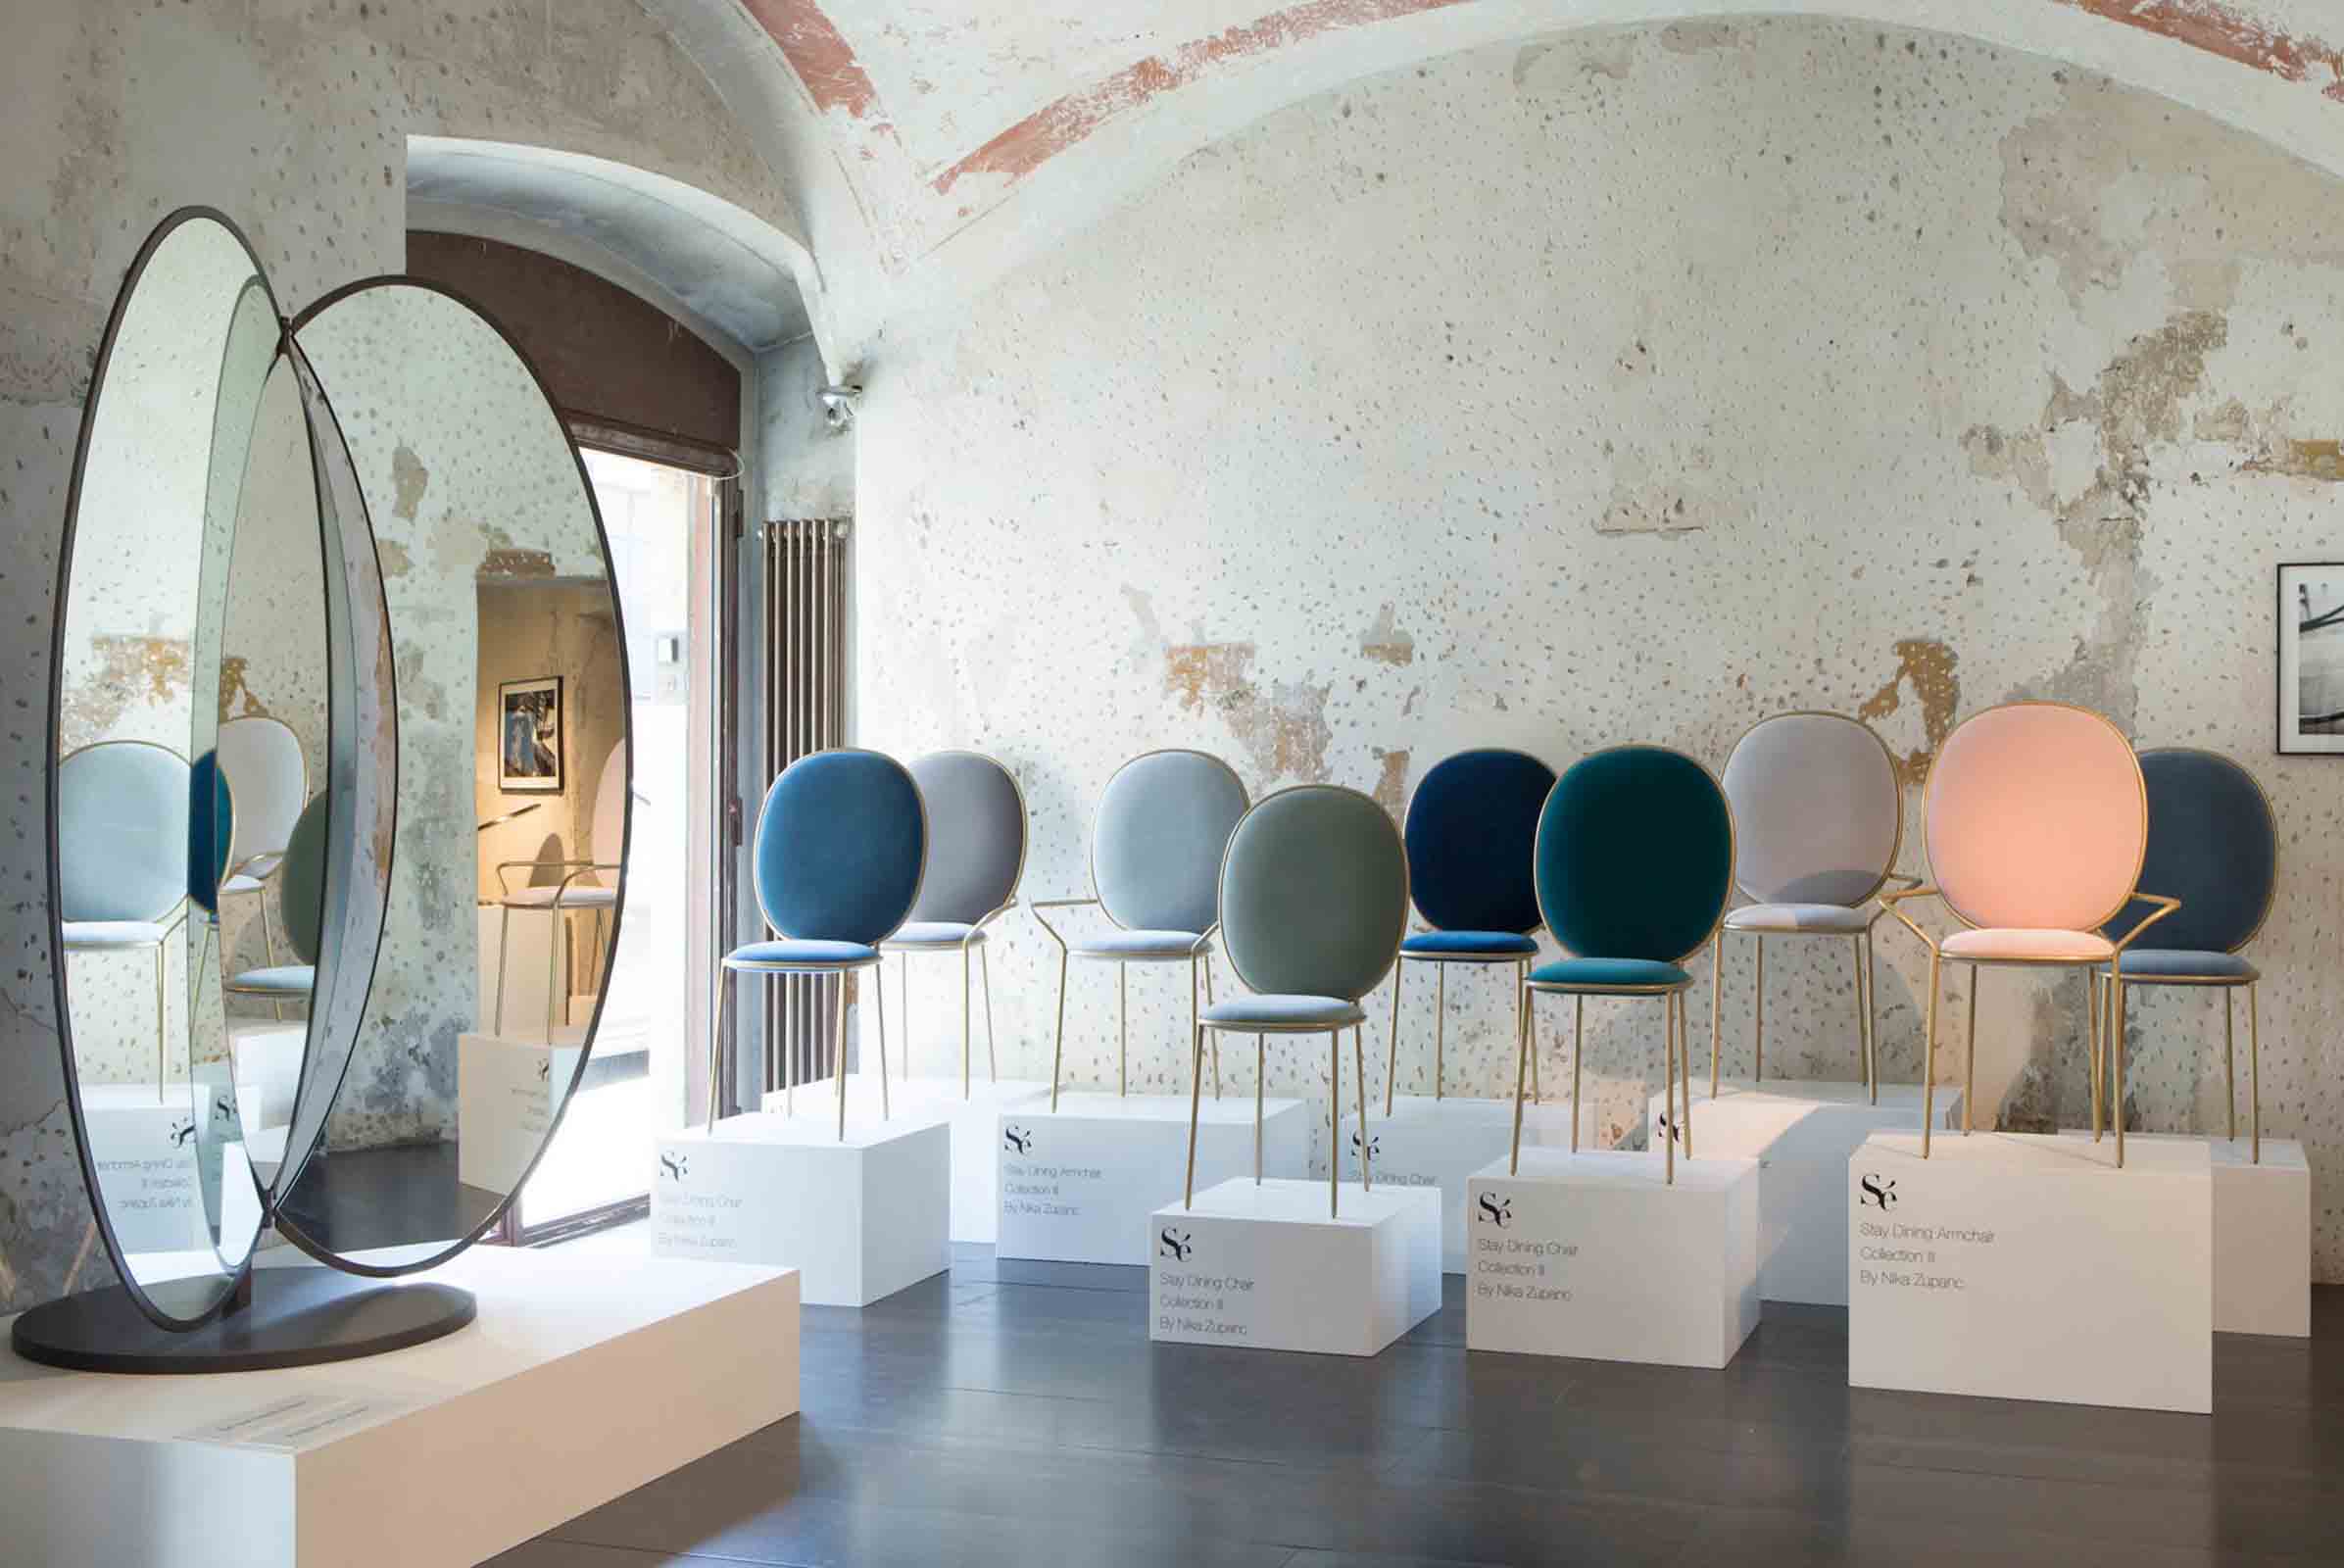 ‘Stay’ chairs and Dressing mirror from Collection III designed by Nika Zupanc for Sé on display at Spazio Rossana Orlandi